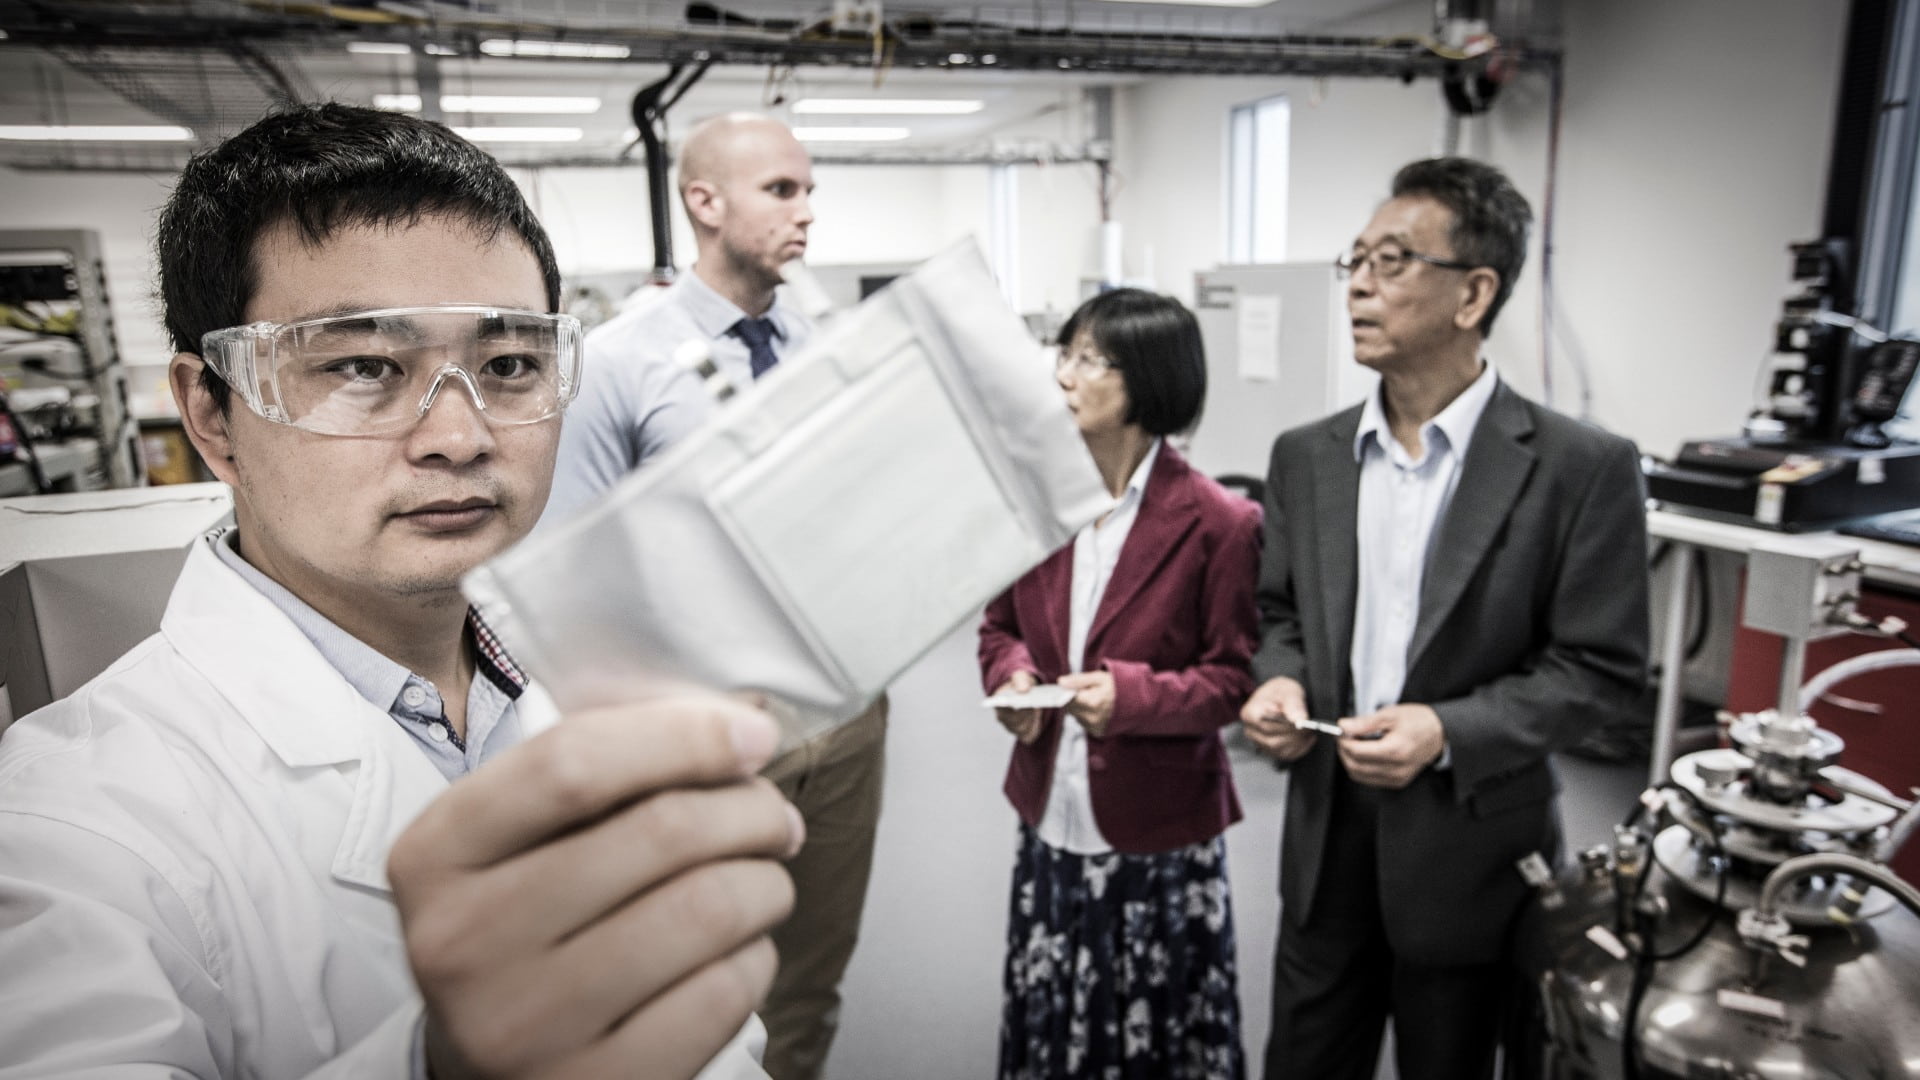 UOW’s Institute for Superconducting and Electronic Materials (ISEM), which has a well-established world reputation in energy storage materials research will develop a pilot-scale sodium materials production facility to prototype and develop the modular and expandable battery packs.